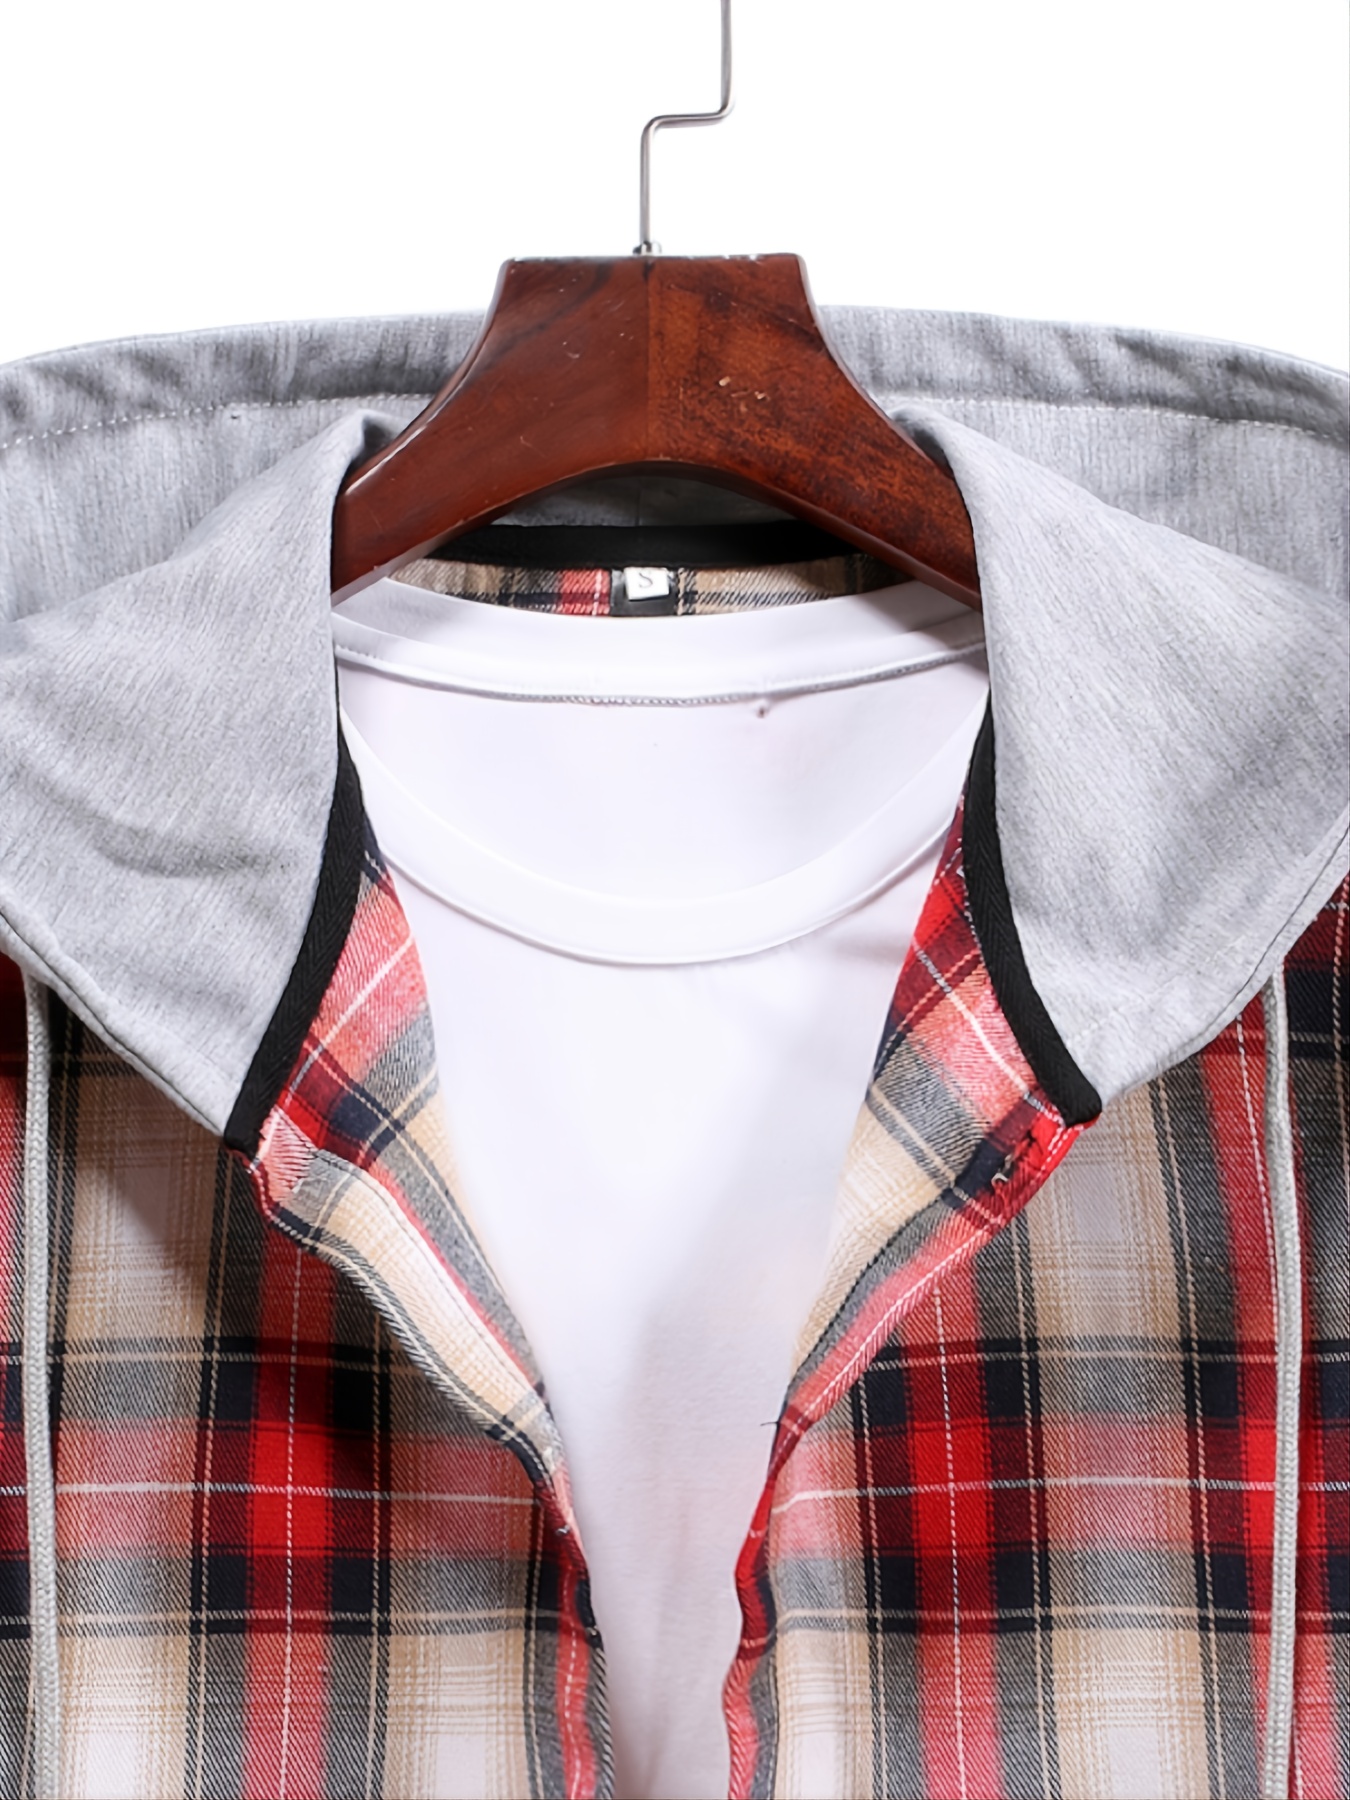 Men's Fashion Hooded Plaid Shirt With Buttons, Fall Winter Classic Design  Warm Long Sleeve Shirt